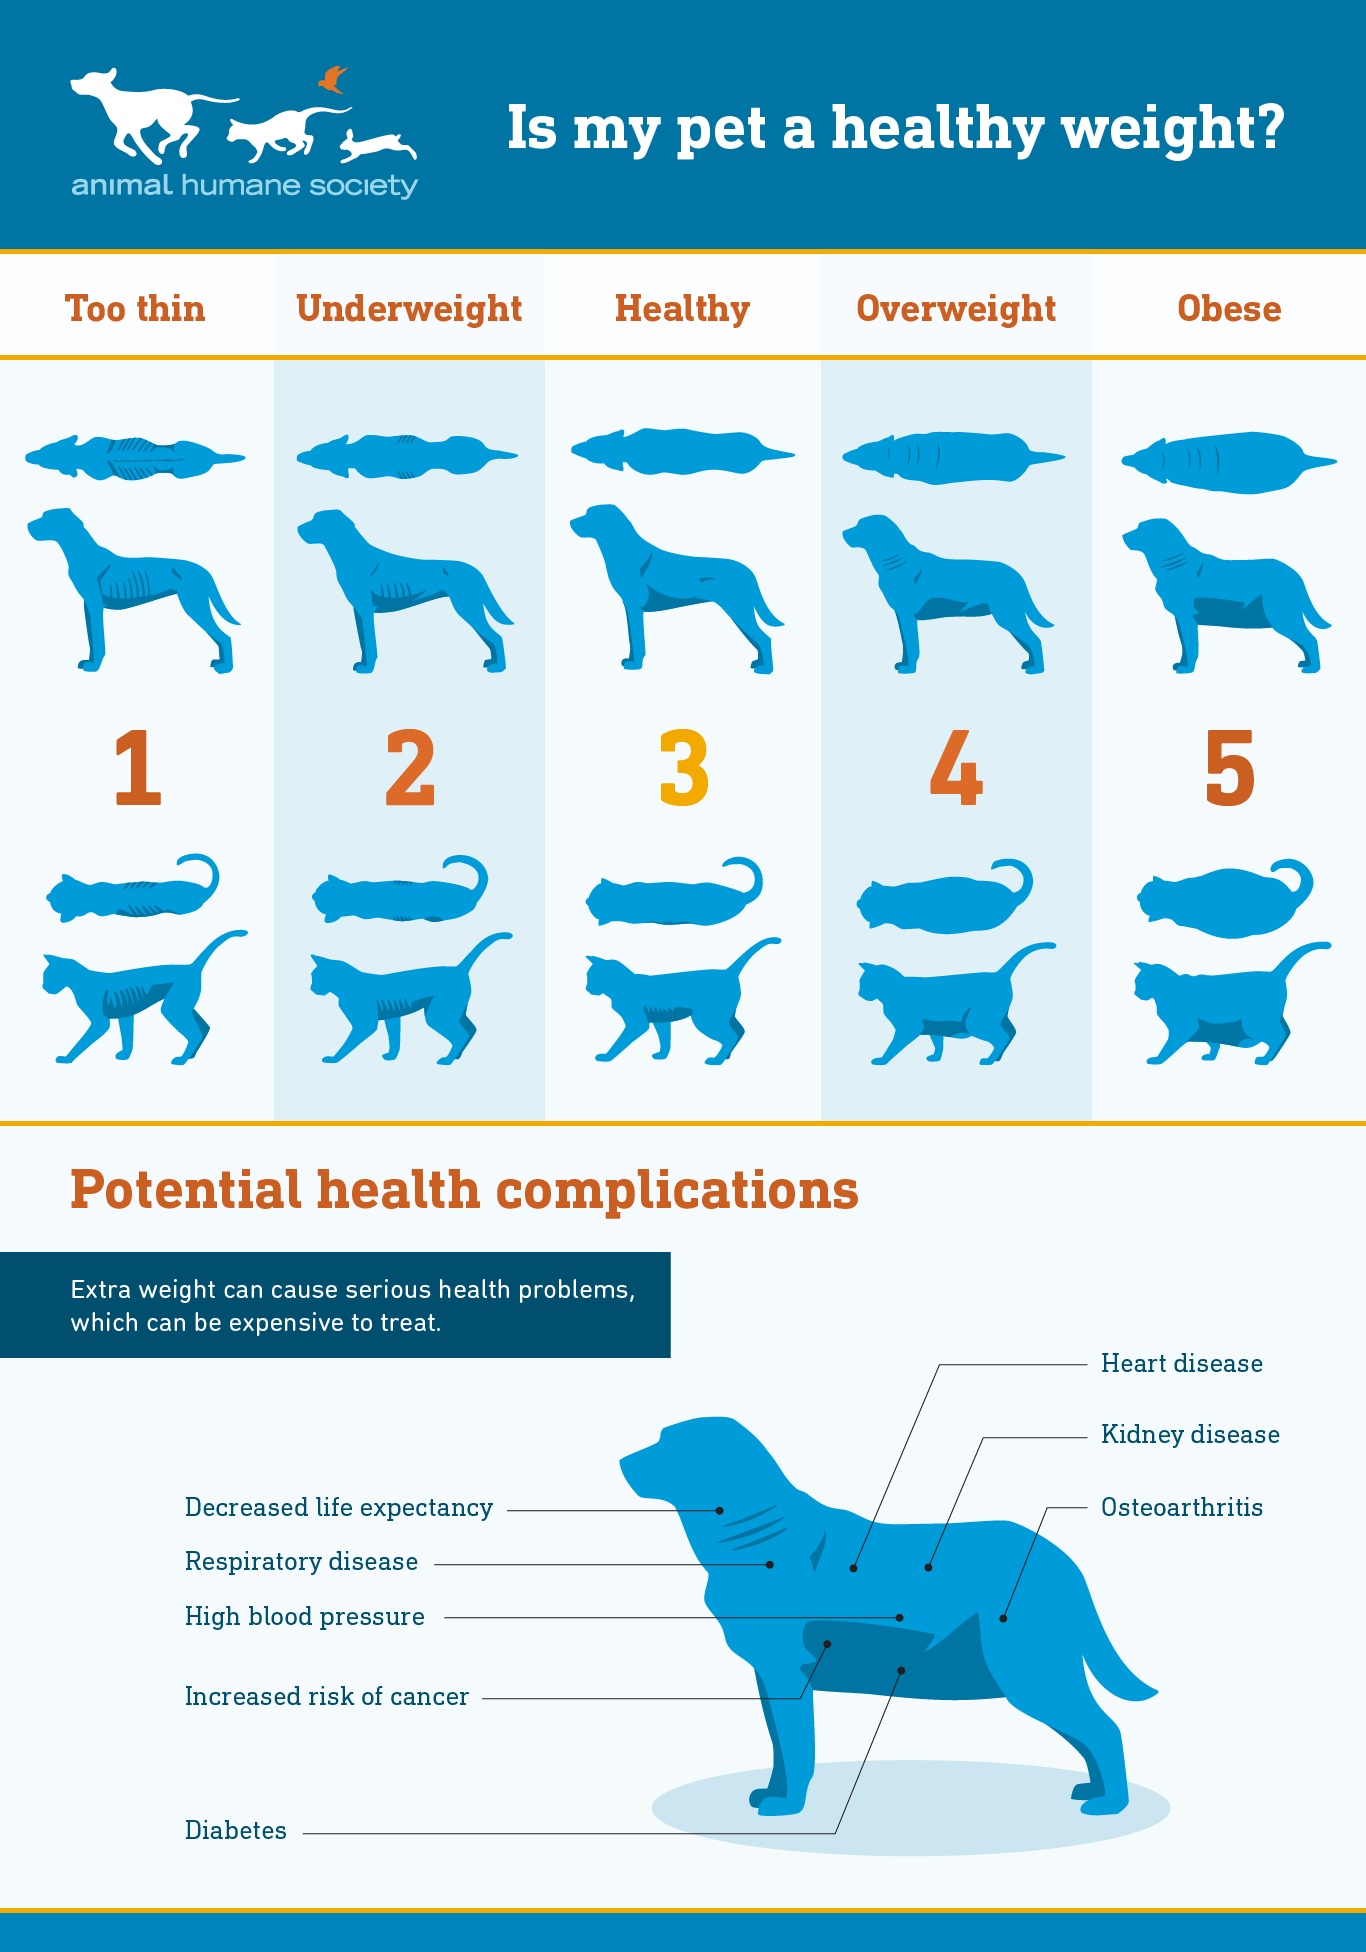 Graphic diagraming 5 stages of pet obesity